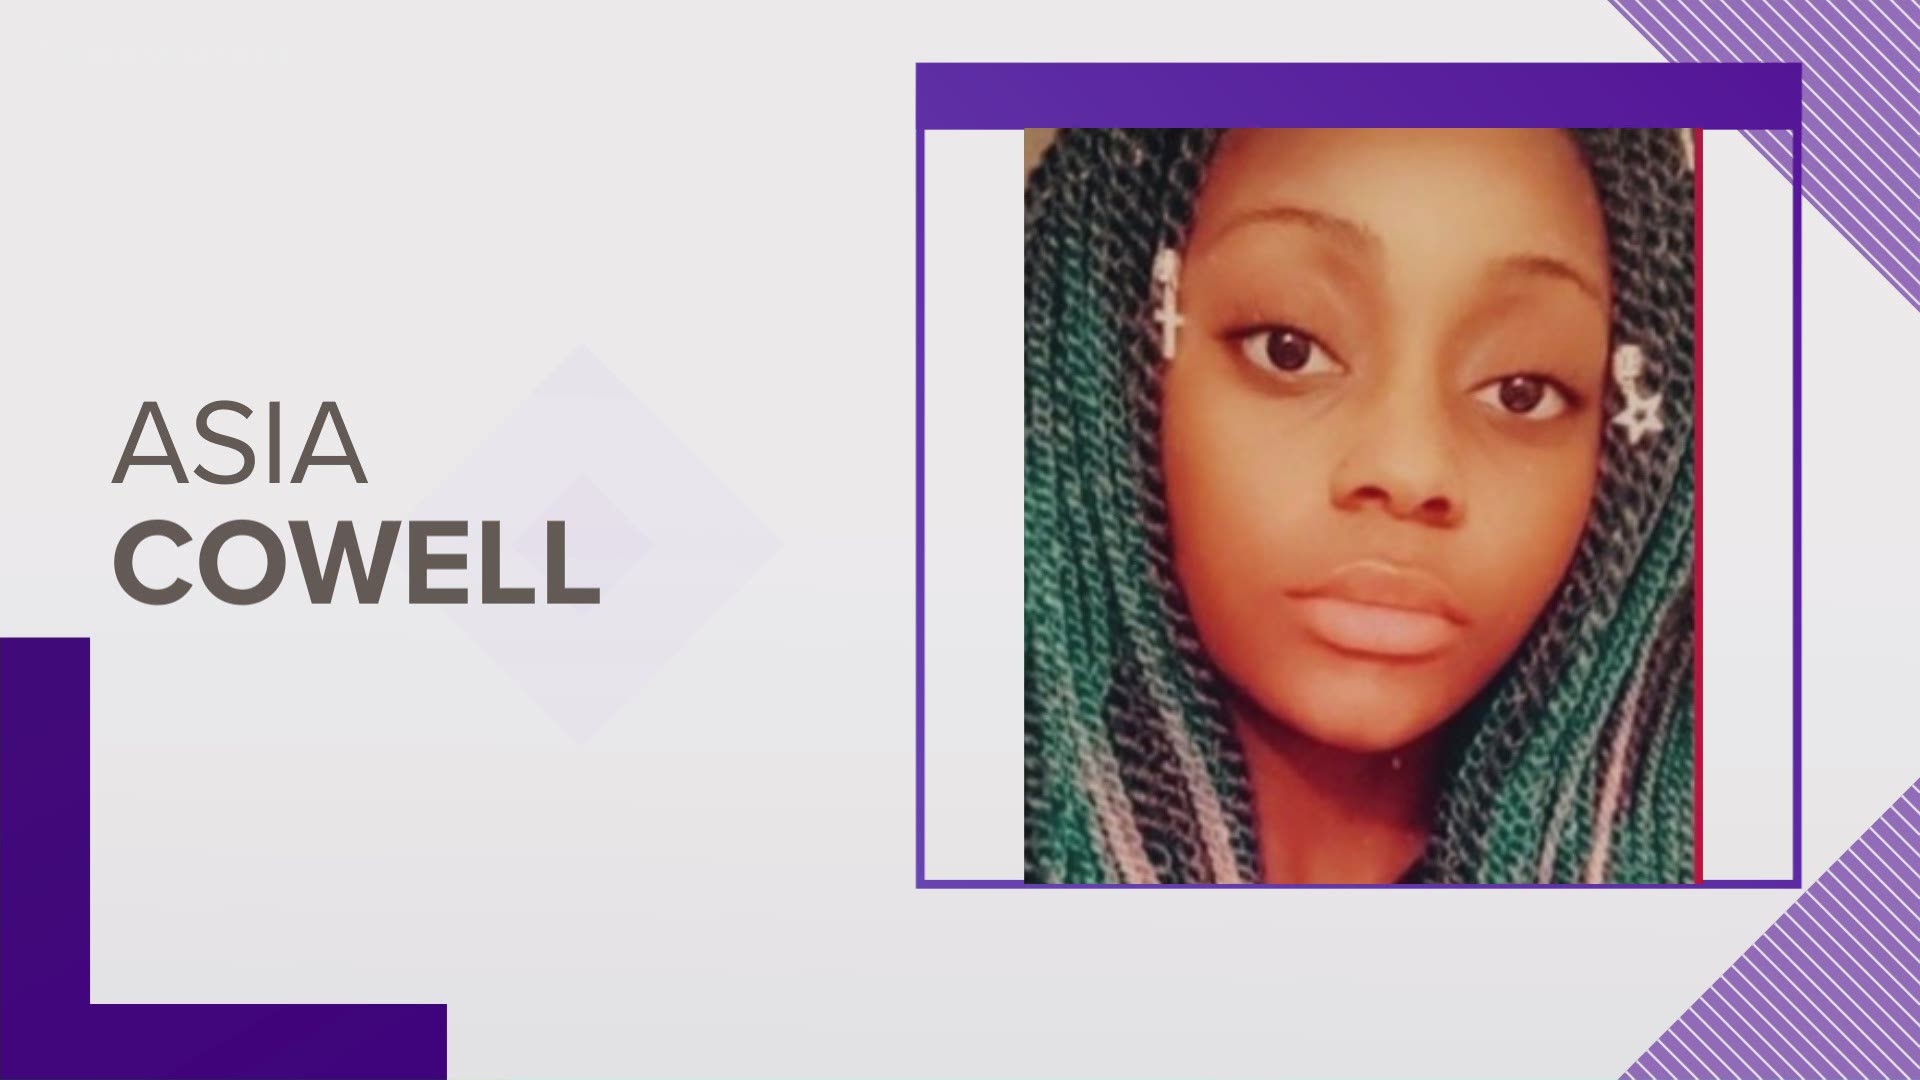 A release from police said Asia Cowell was last seen on September 7, 2020, near 7400 block of W. Kenmore Drive.